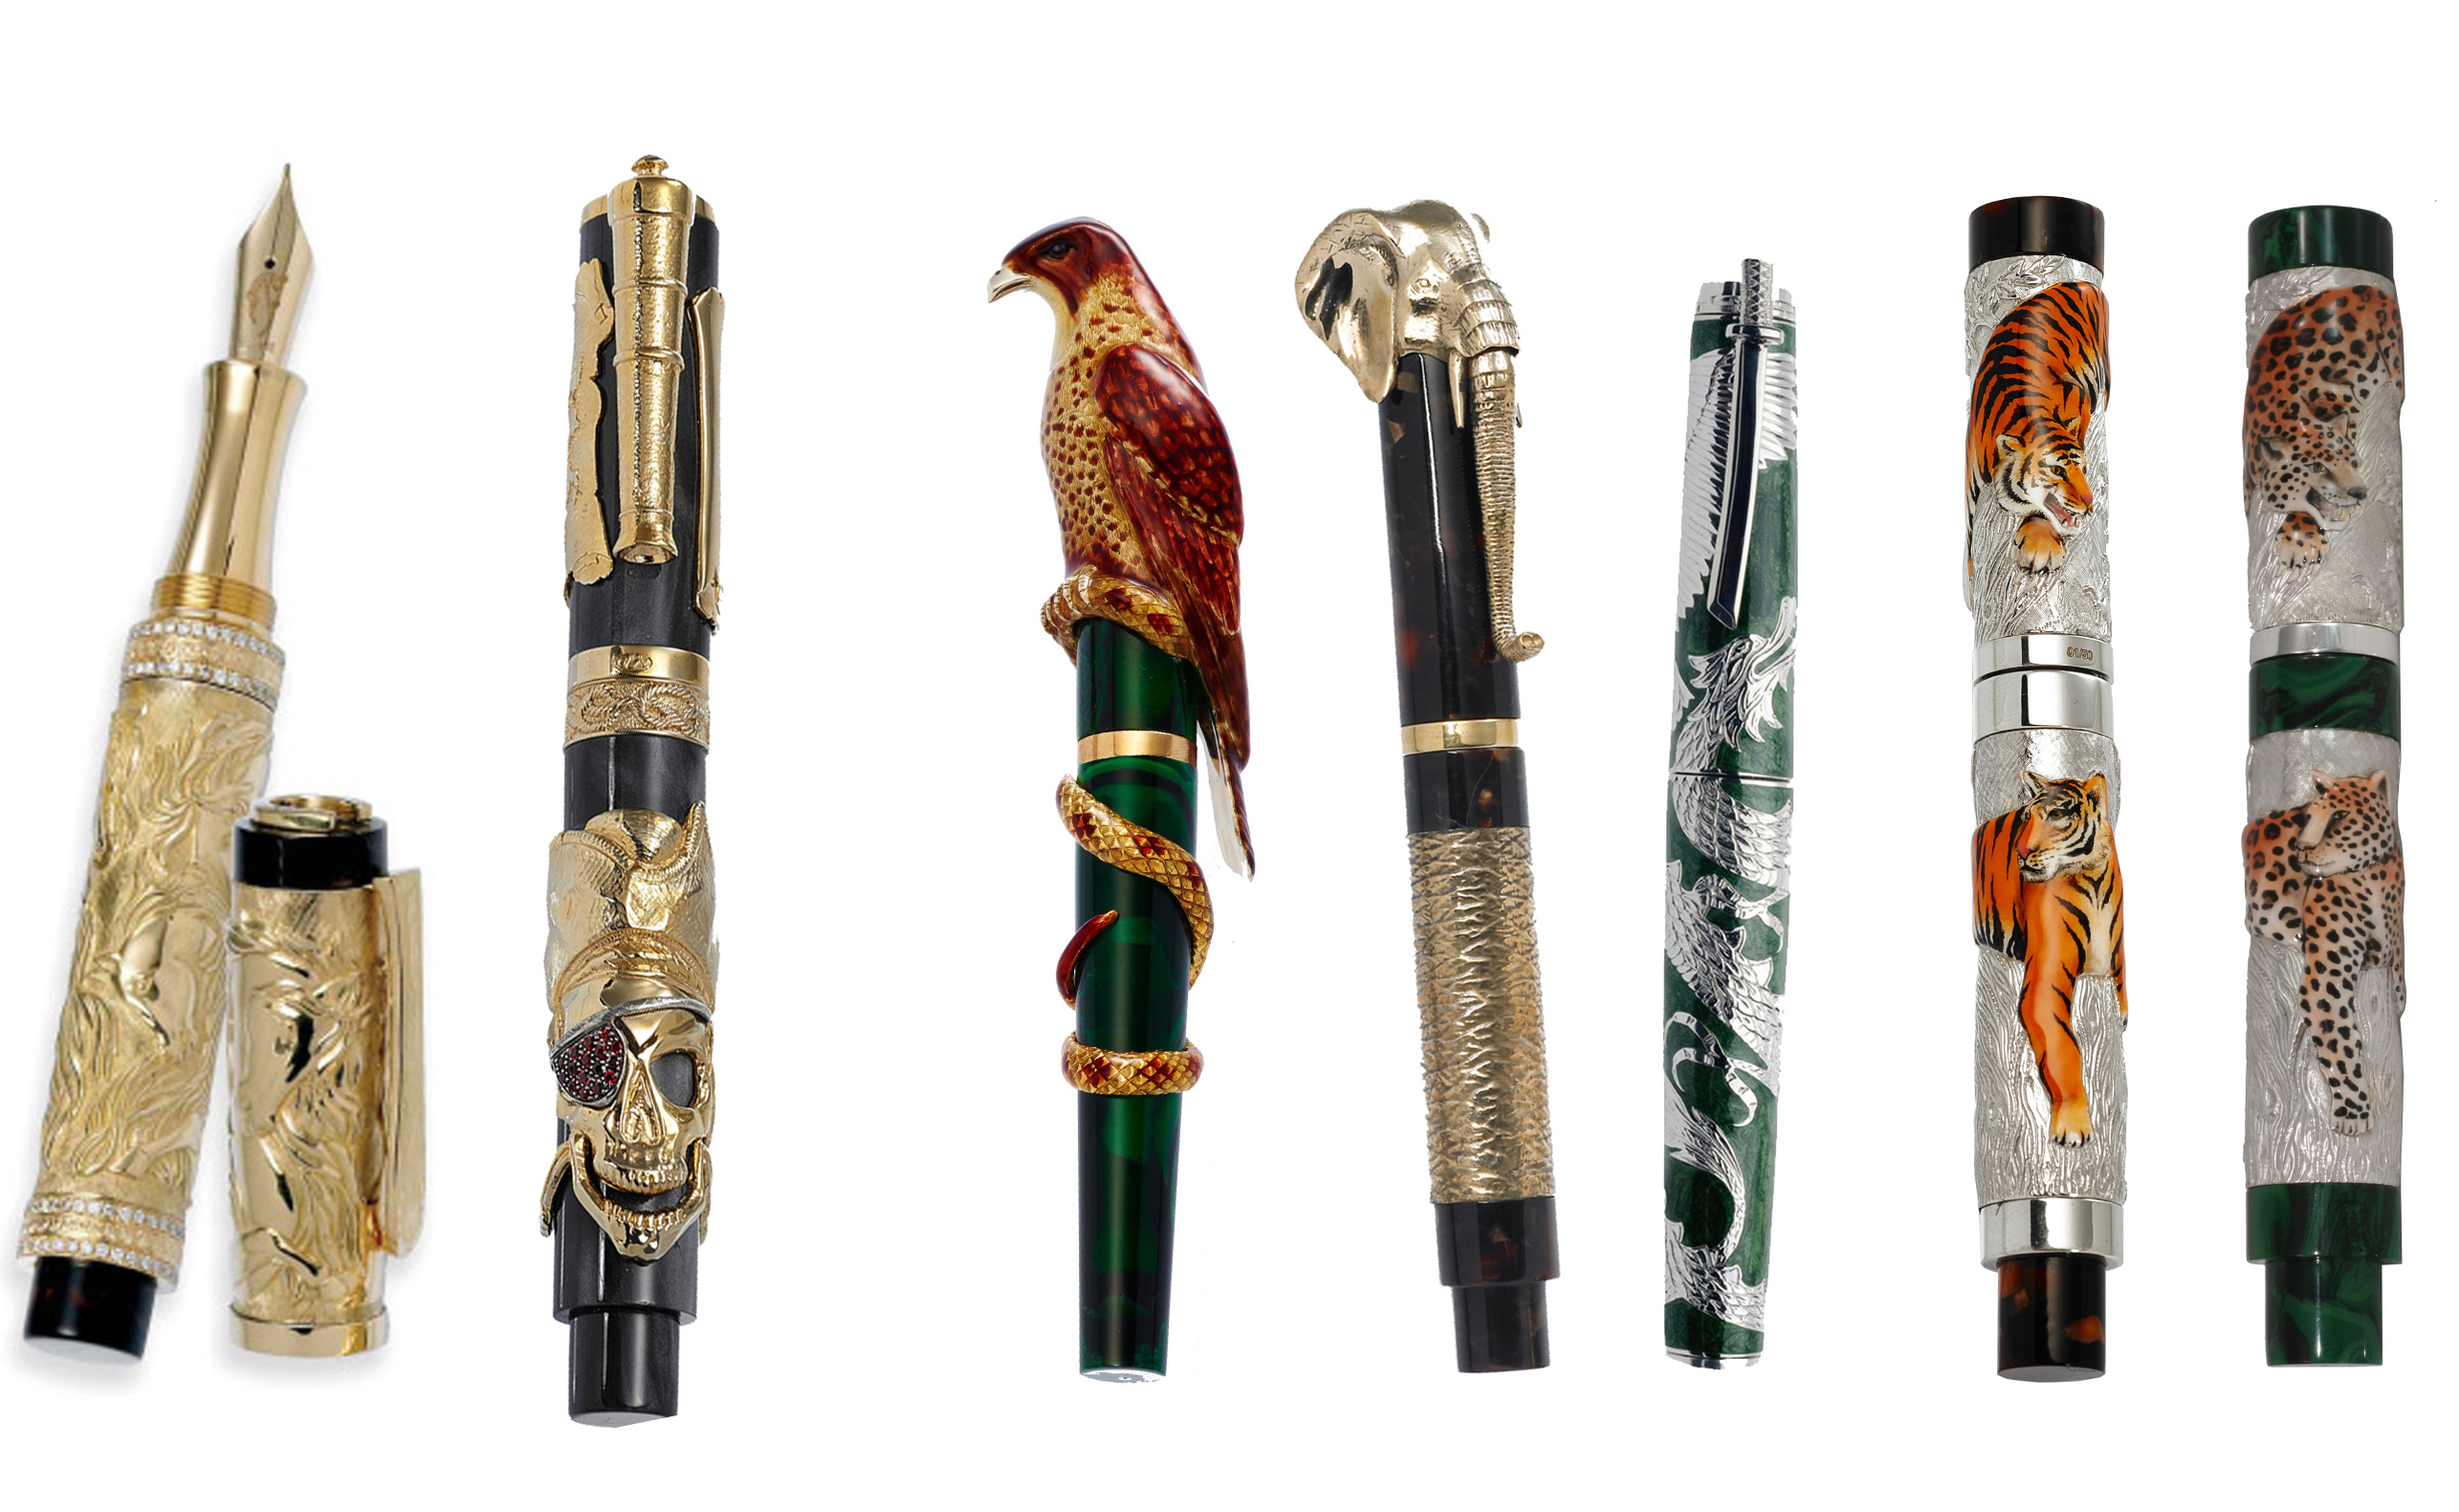 Luxury Rollerball Pen as a Work of Art Luxury Lifestyle Awards